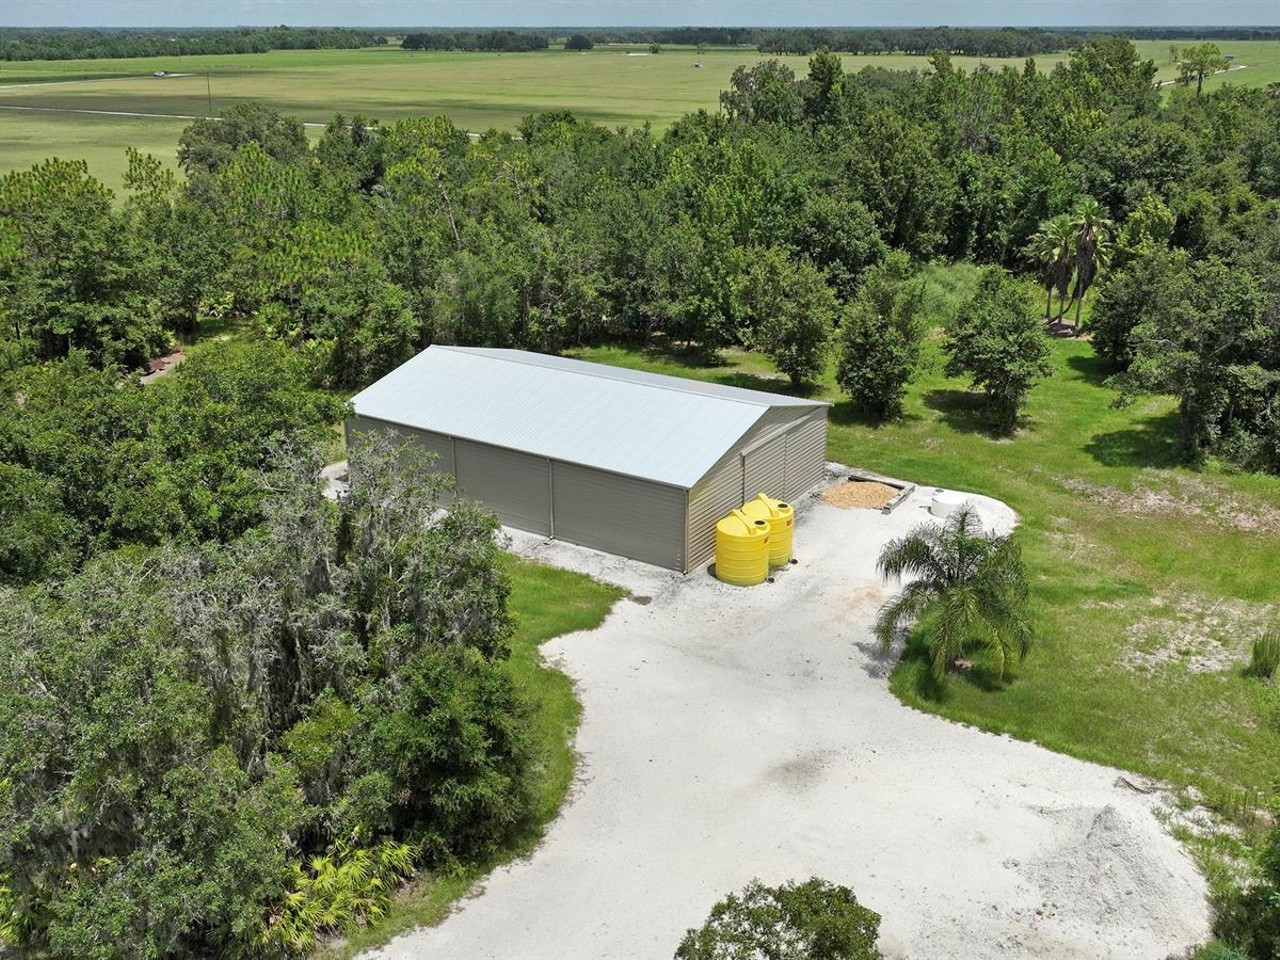 The Florida home of Ed Lowe, who created Kitty Litter, is now for sale